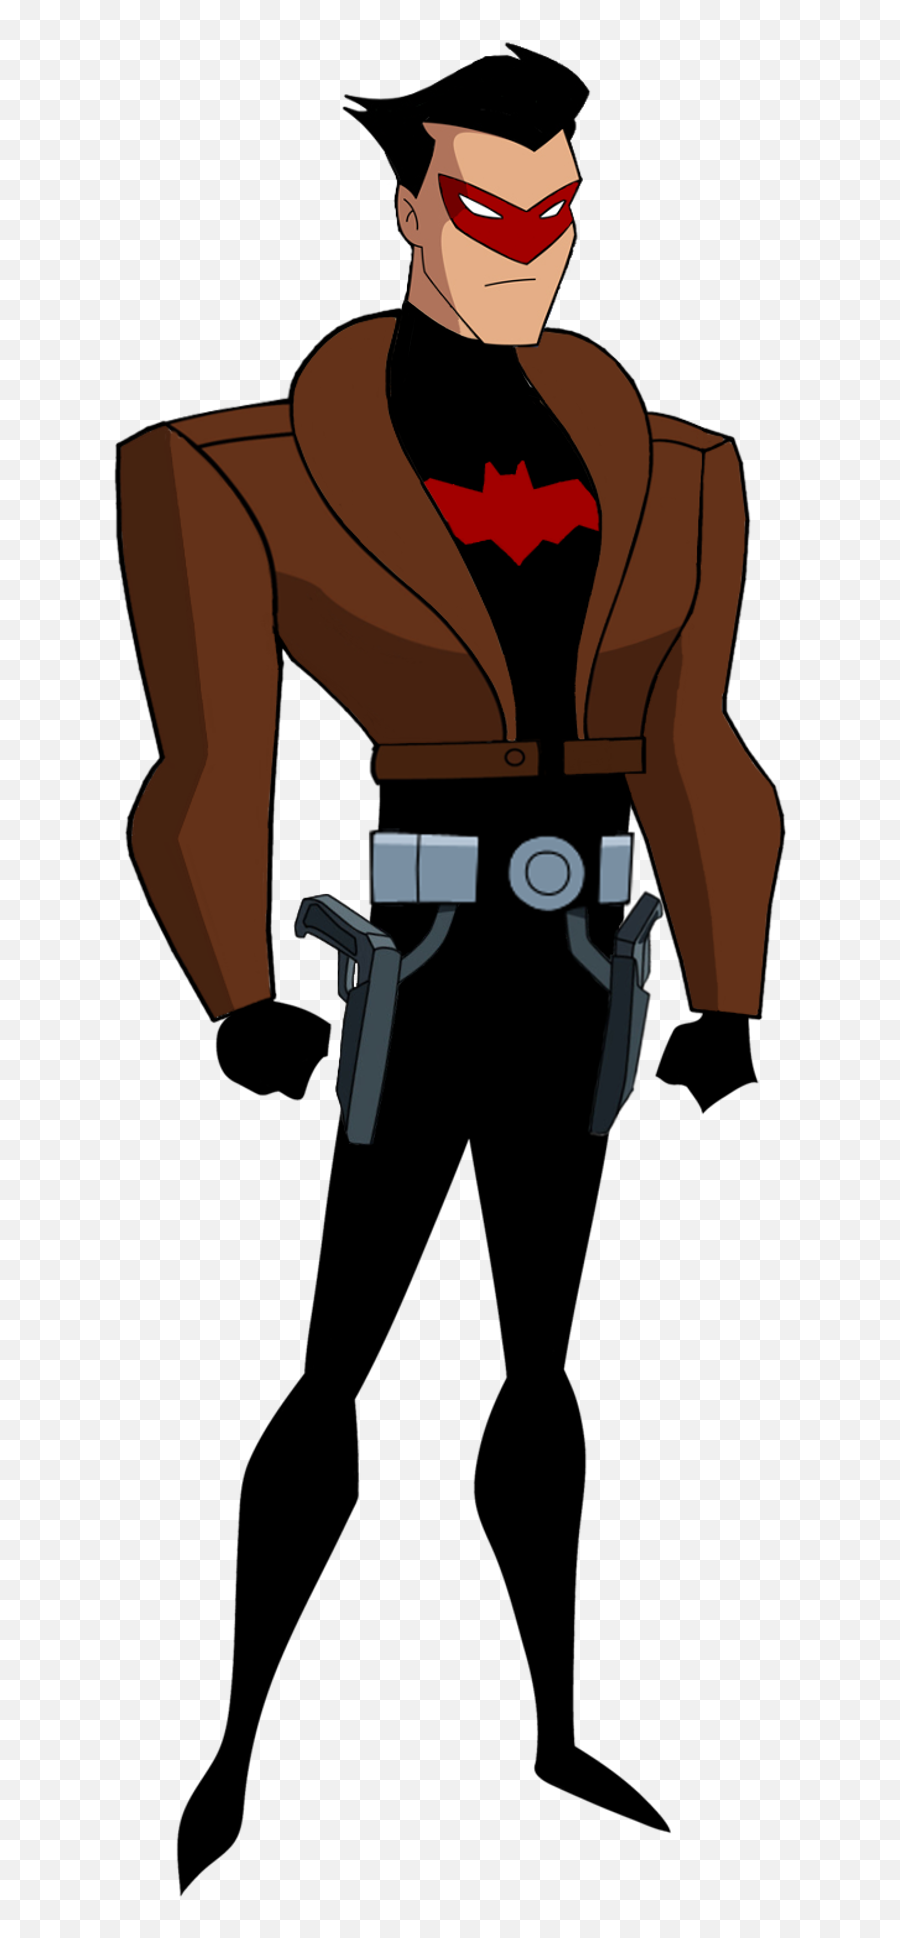 Transparent Hood U0026 Png Clipart Free Download - Ywd Batman Under The Red Hood Jason Todd,Red Hood Png